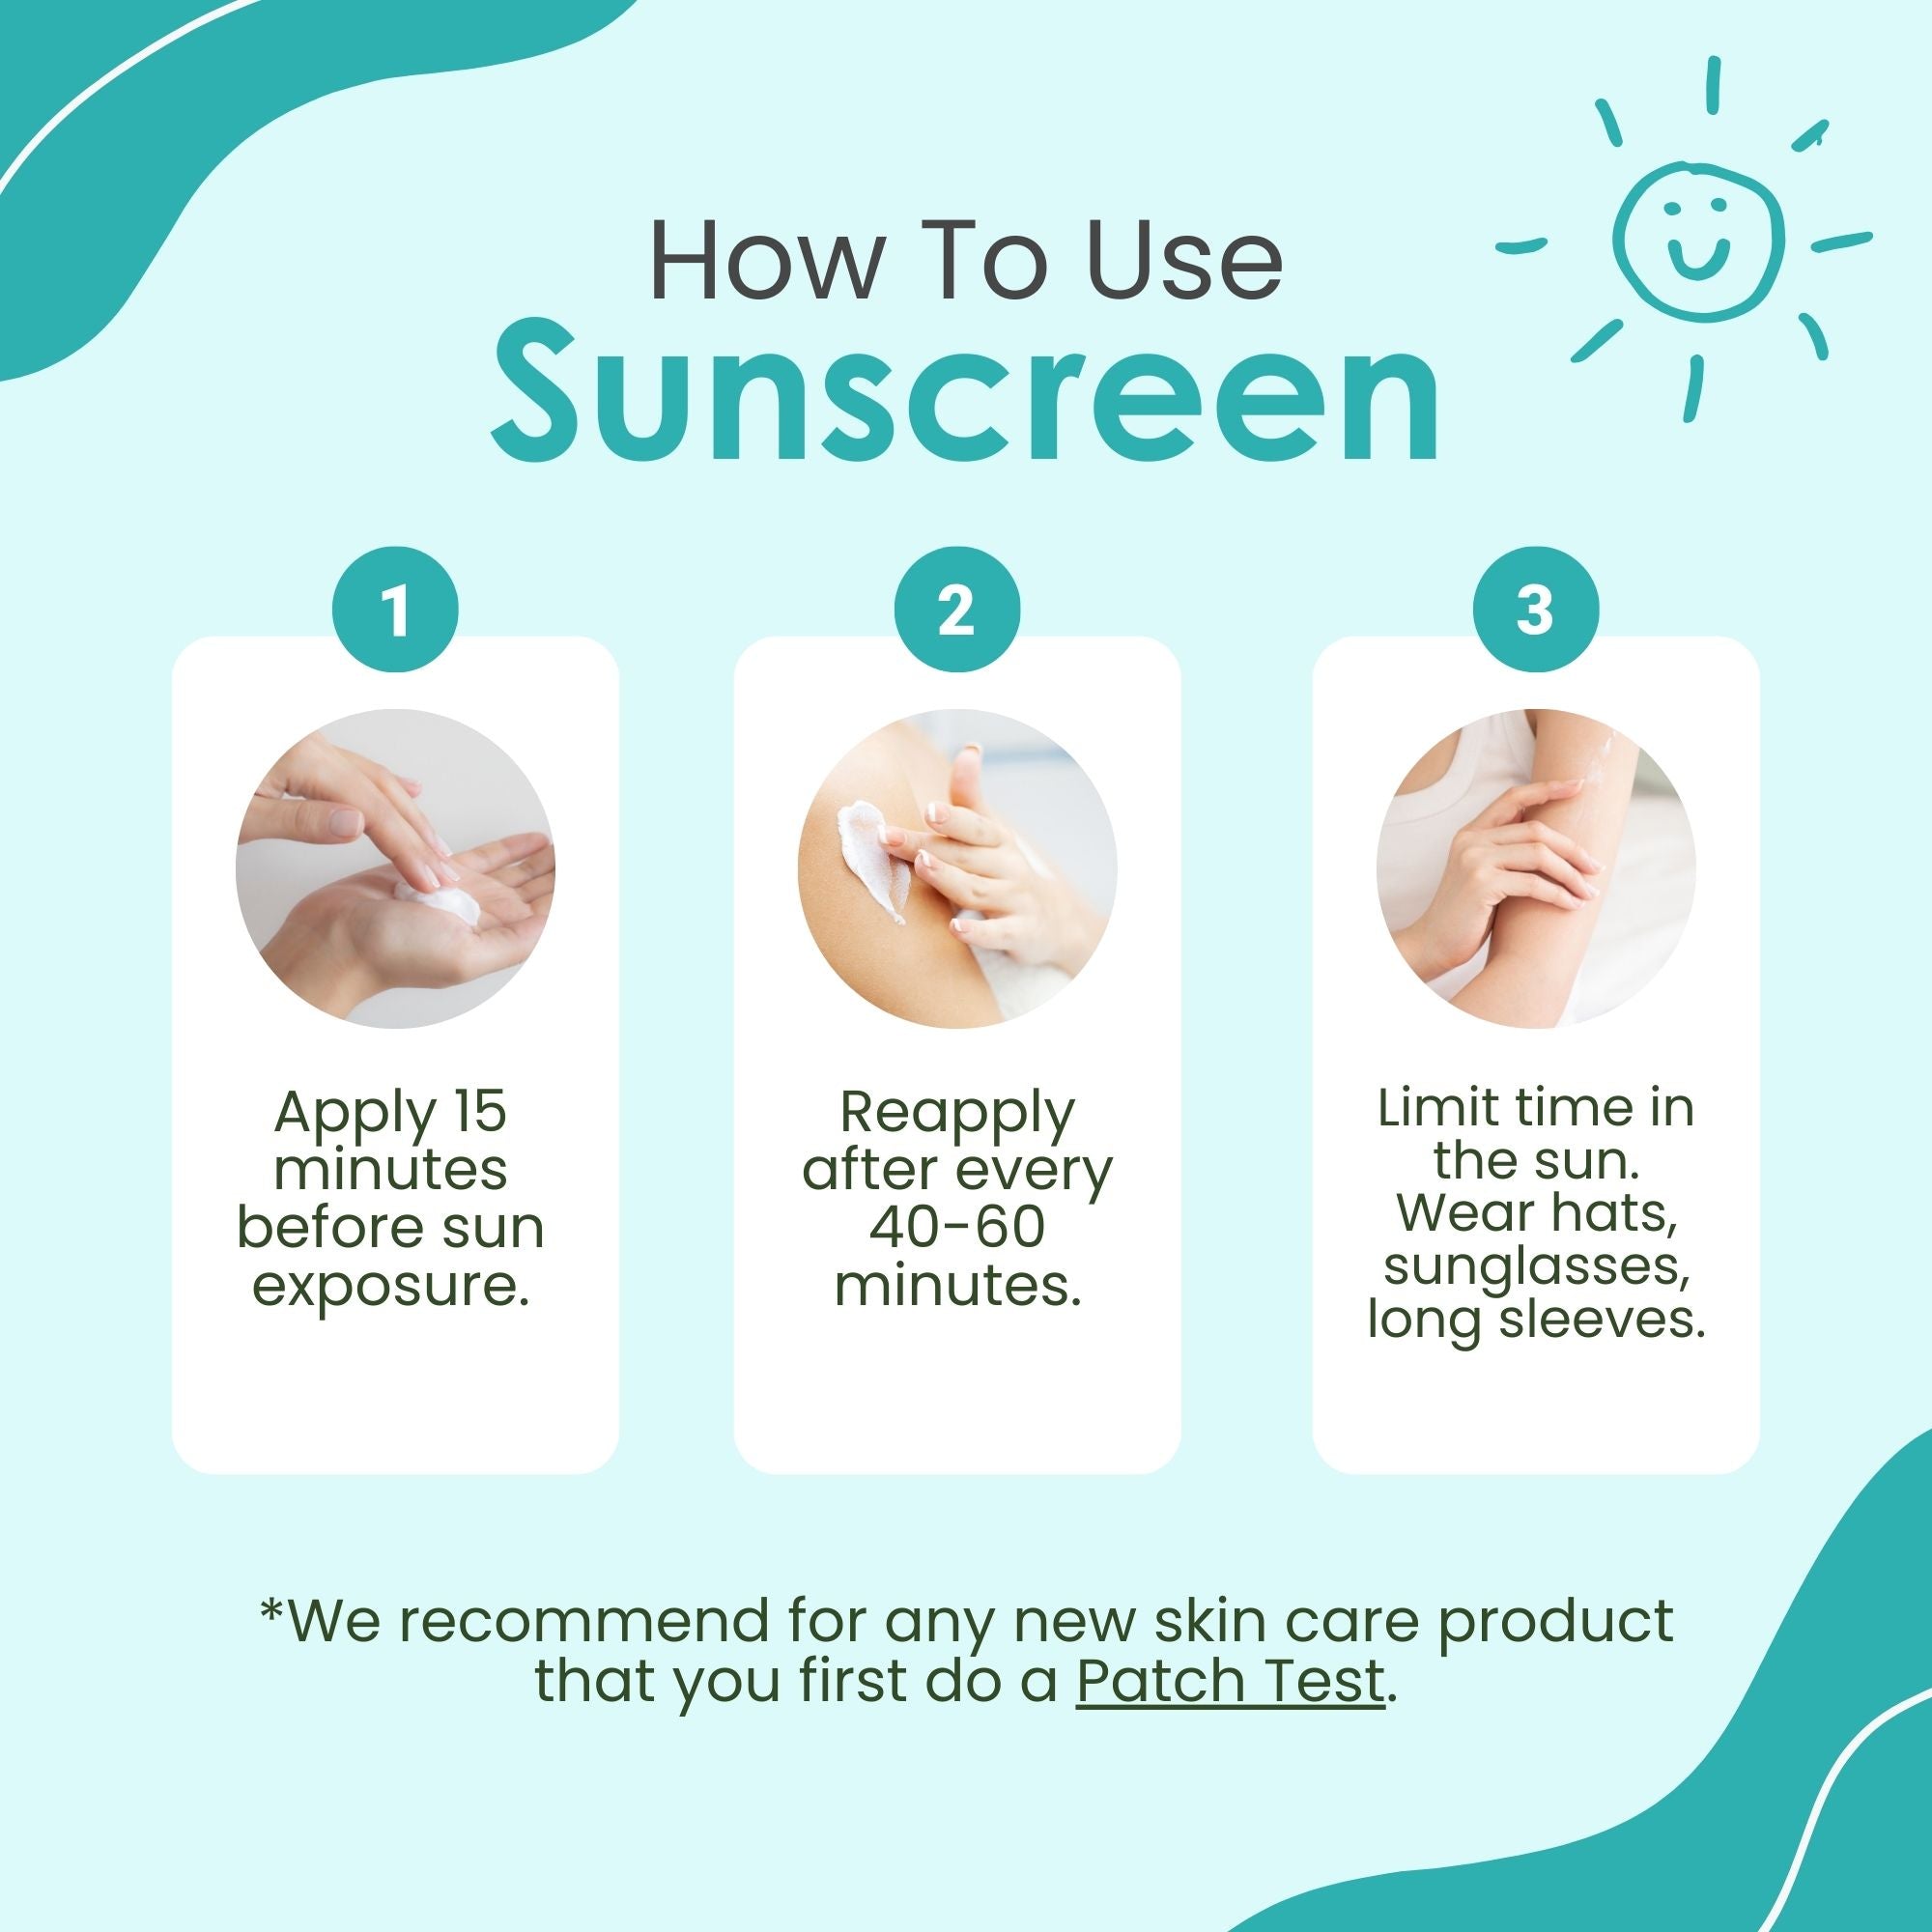 TruKid Easy On SPF 50 Sunscreen How to Use